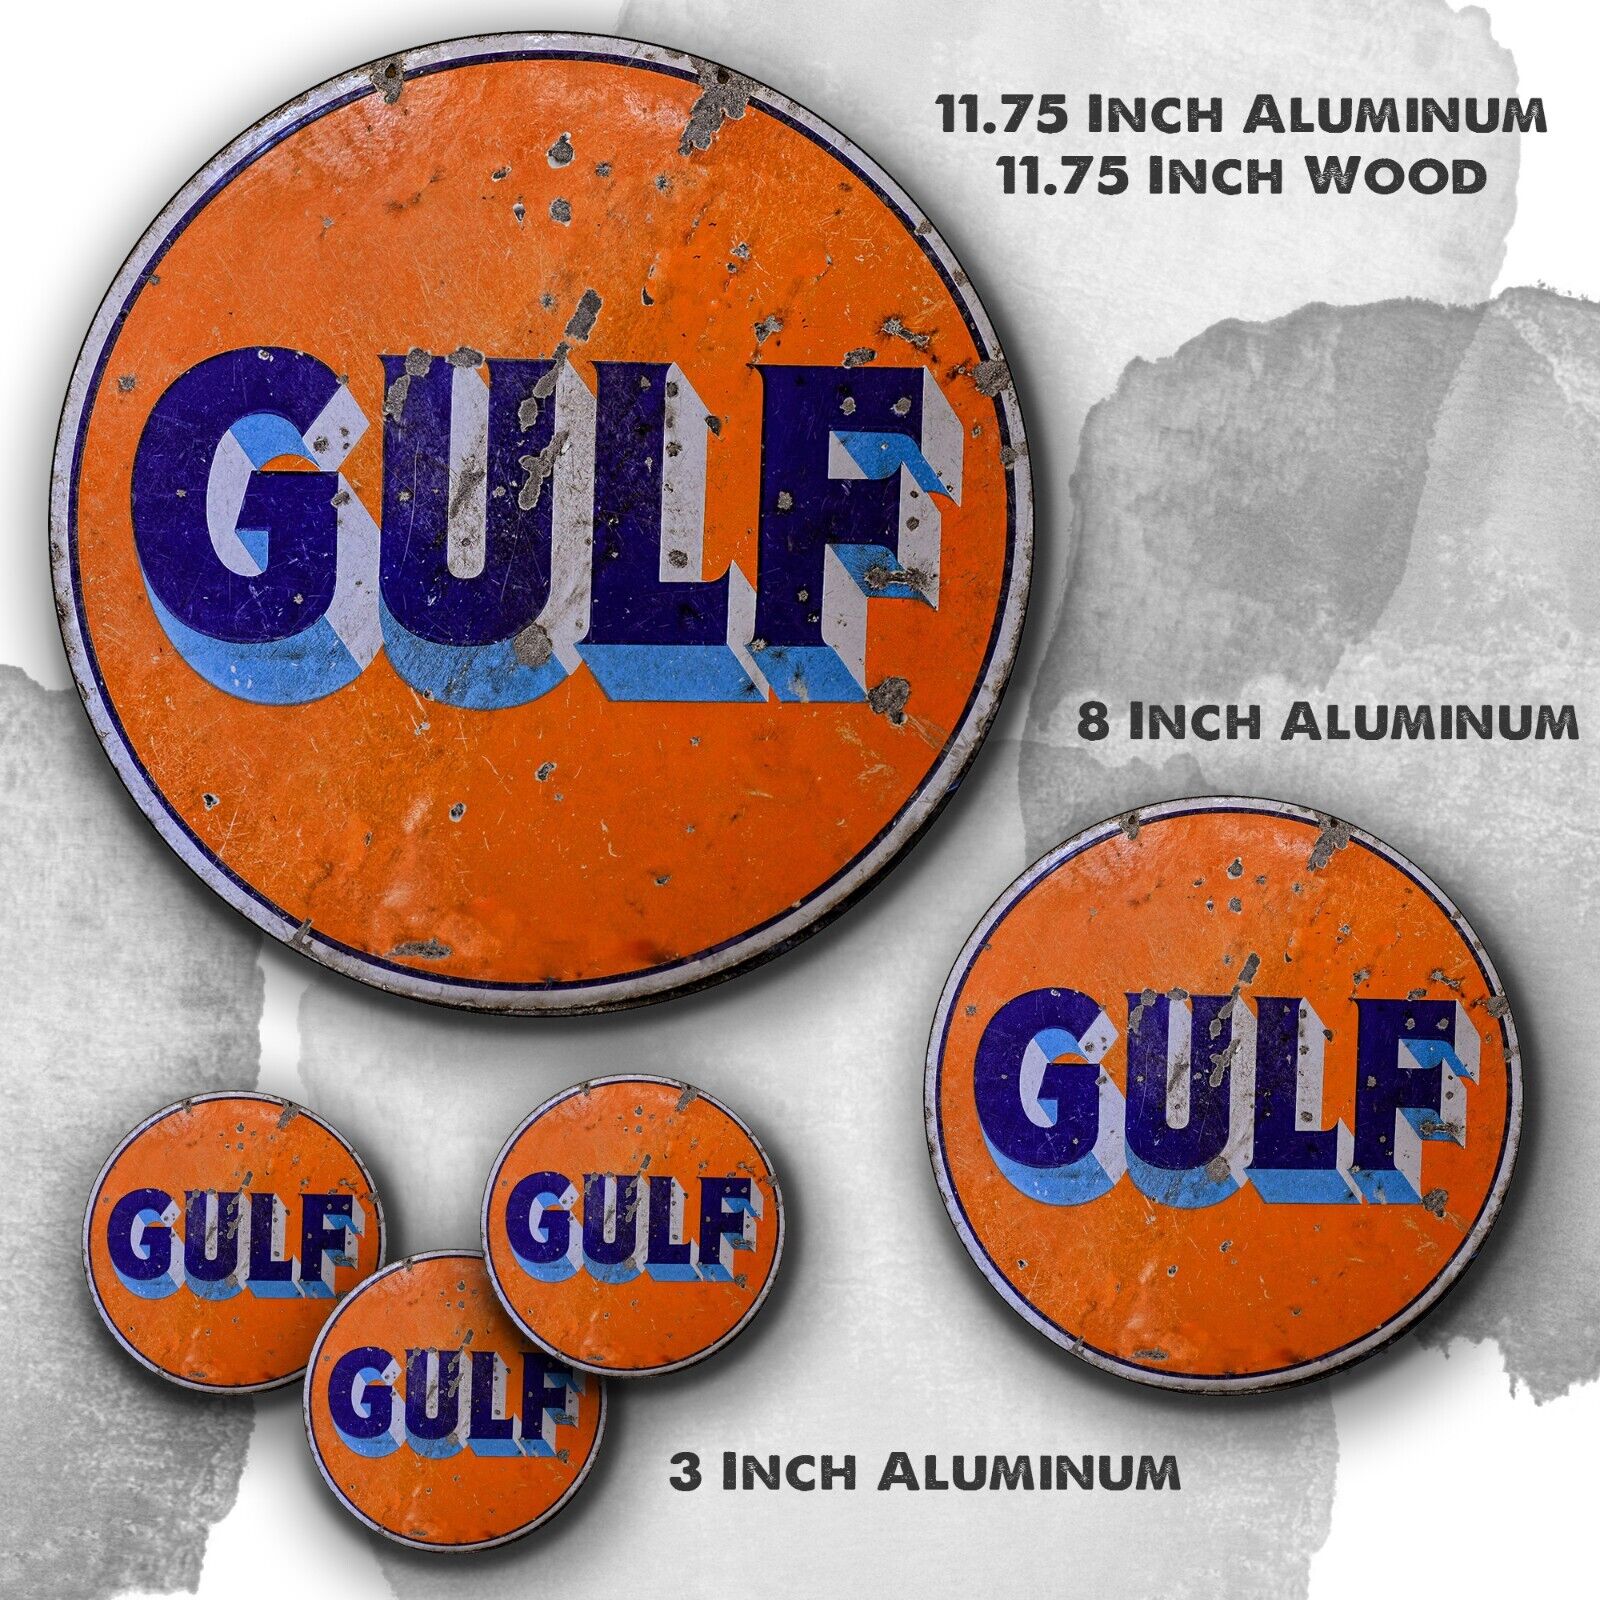 Gulf Gas Oil Dealer Vintage Reproduction Full Color Designs Aluminum Signs